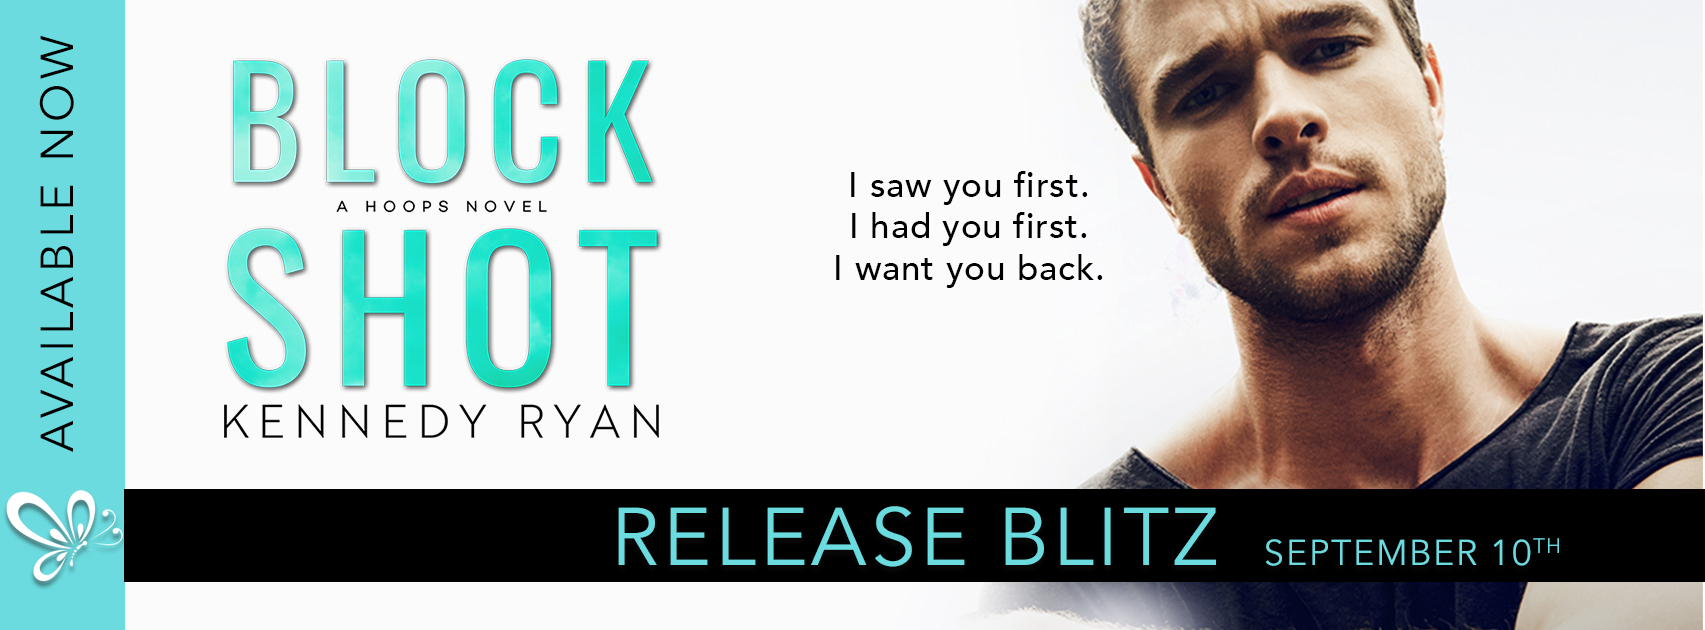 Release Day and giveaway: Block Shot by Kennedy Ryan